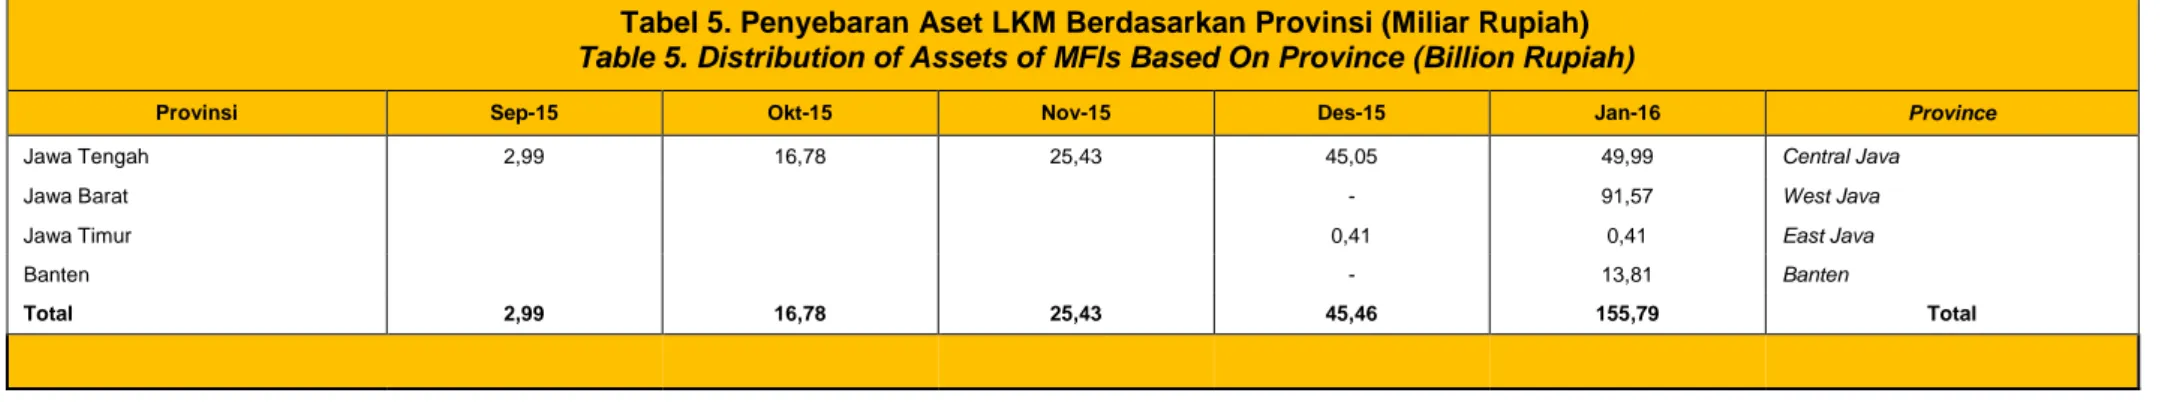 Table 5. Distribution of Assets of MFIs Based On Province (Billion Rupiah) 